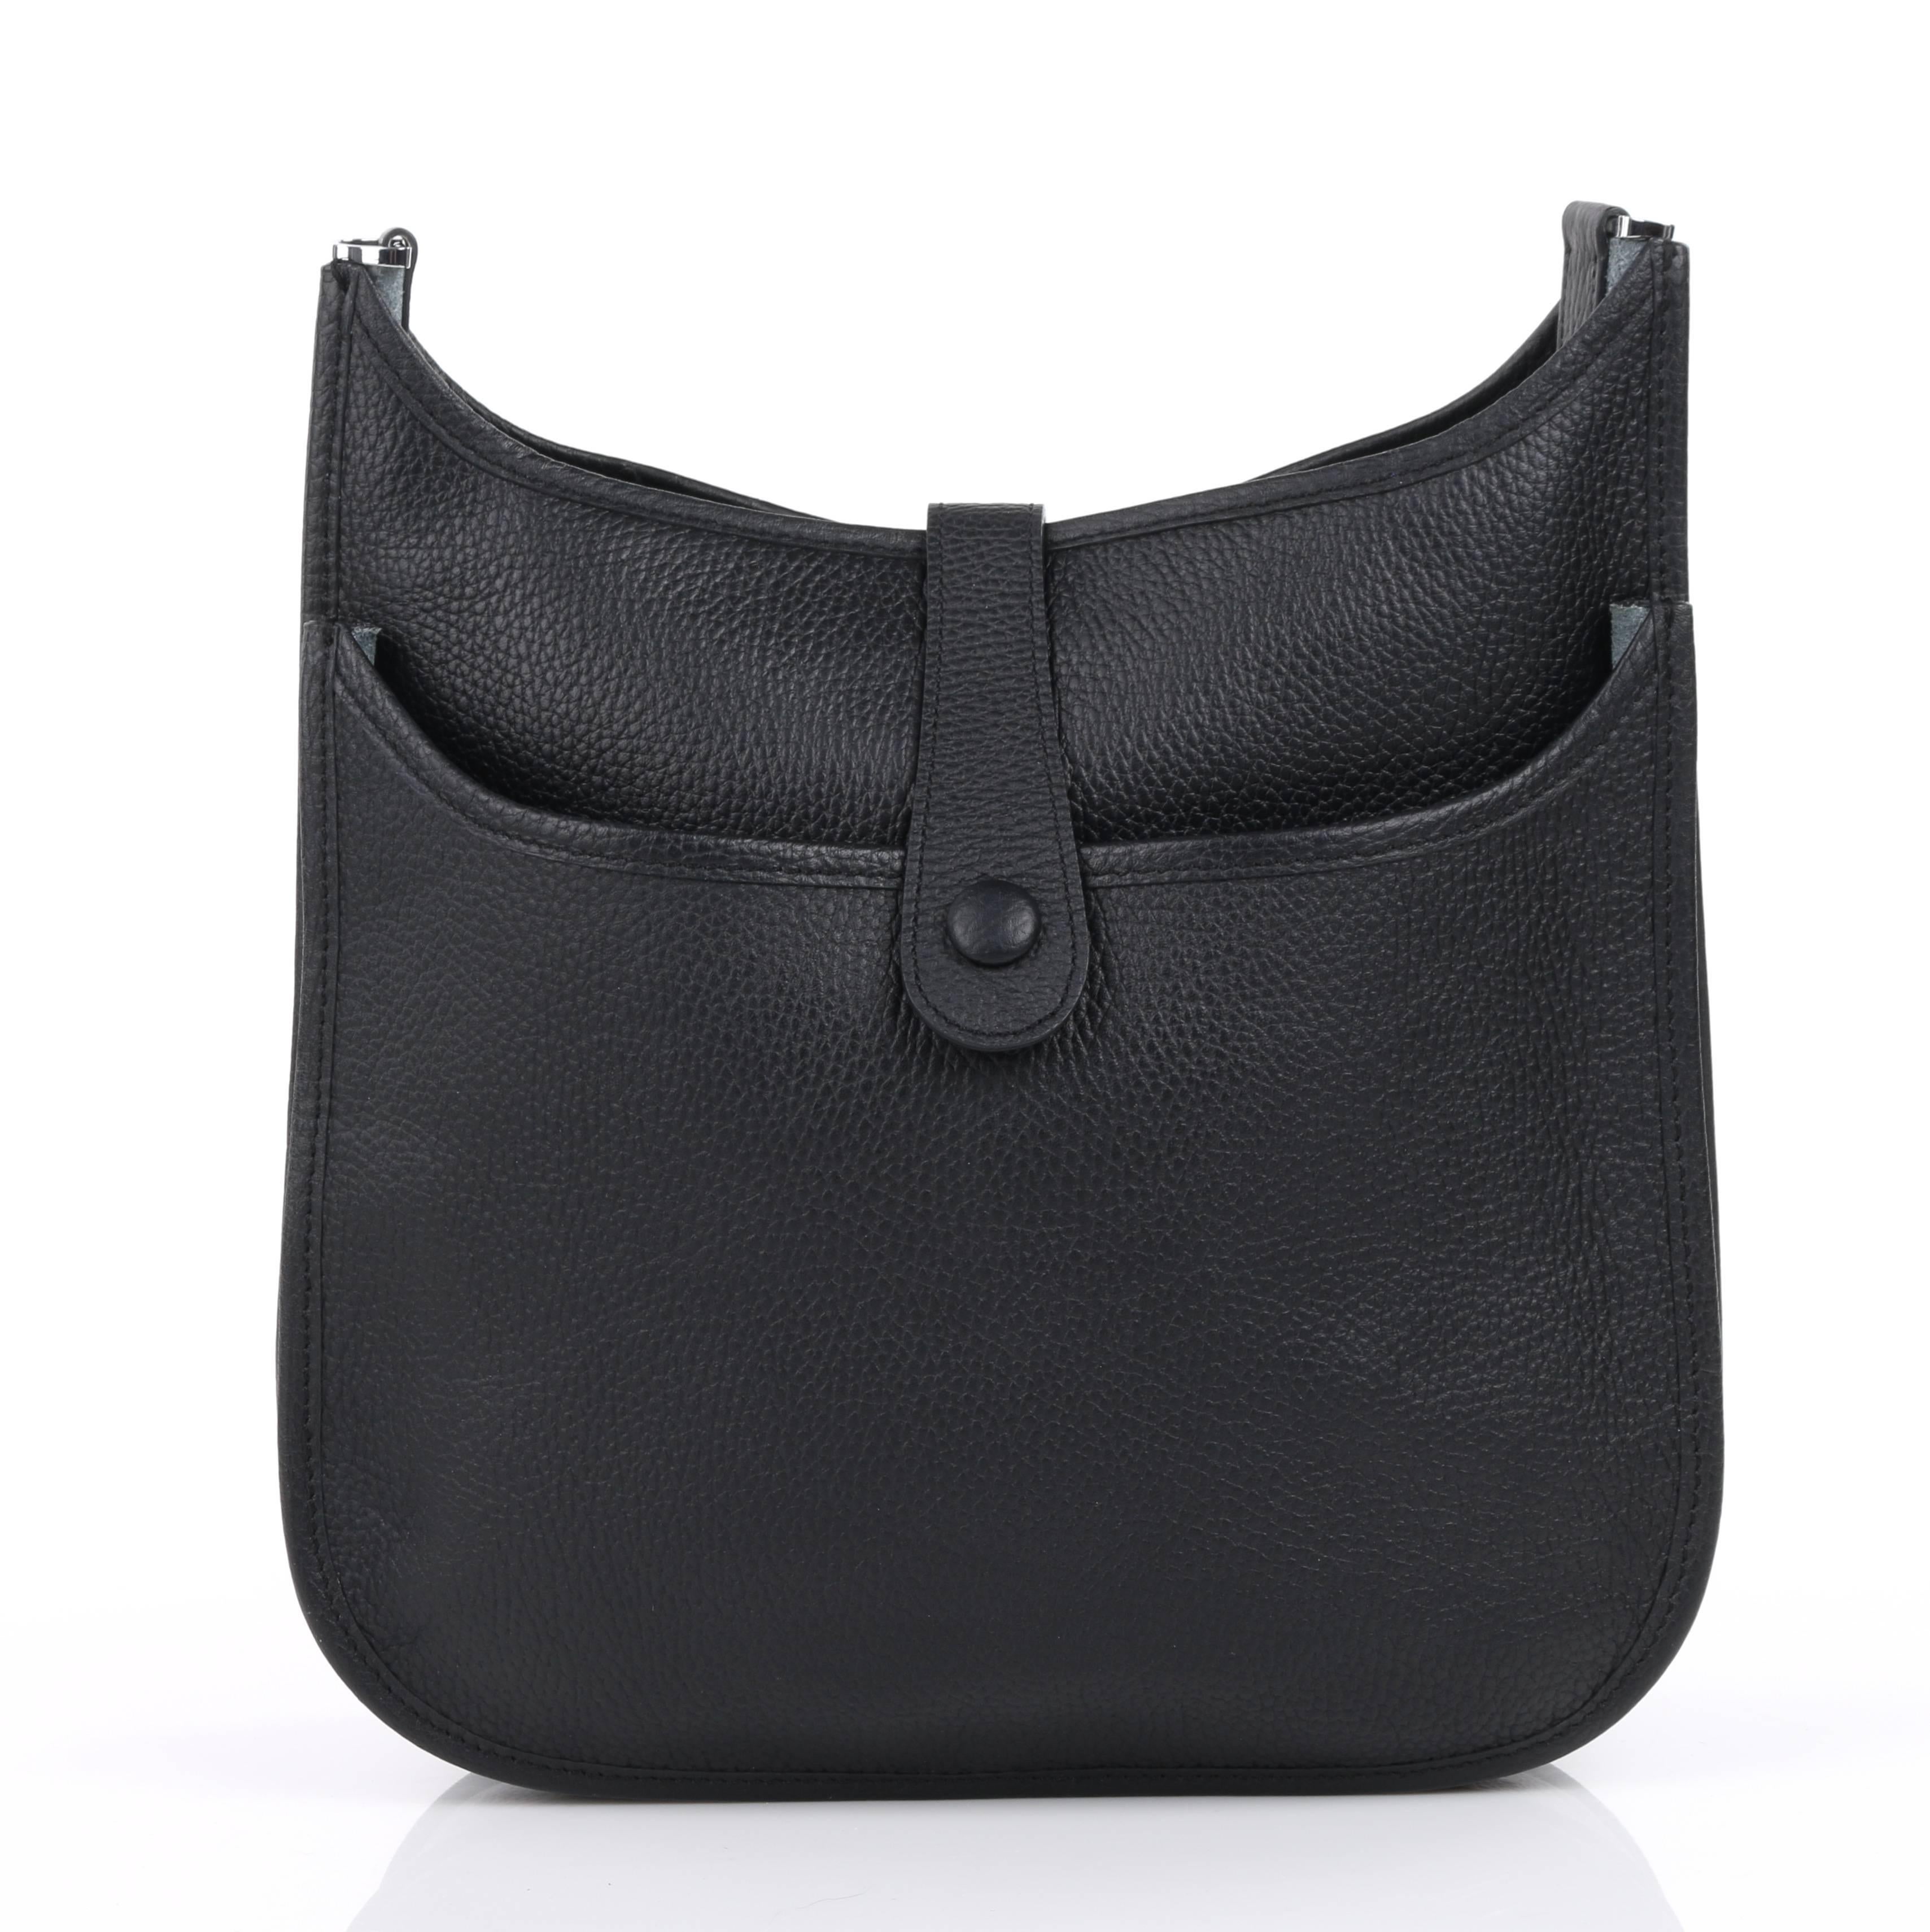 Hermes "Evelyn III 29 PM" black Clemence calfskin leather shoulder bag. Center front perforated "H" oval logo detail. Leather tab with single snap closure at top. Adjustable canvas shoulder strap with silver-toned lobster claw